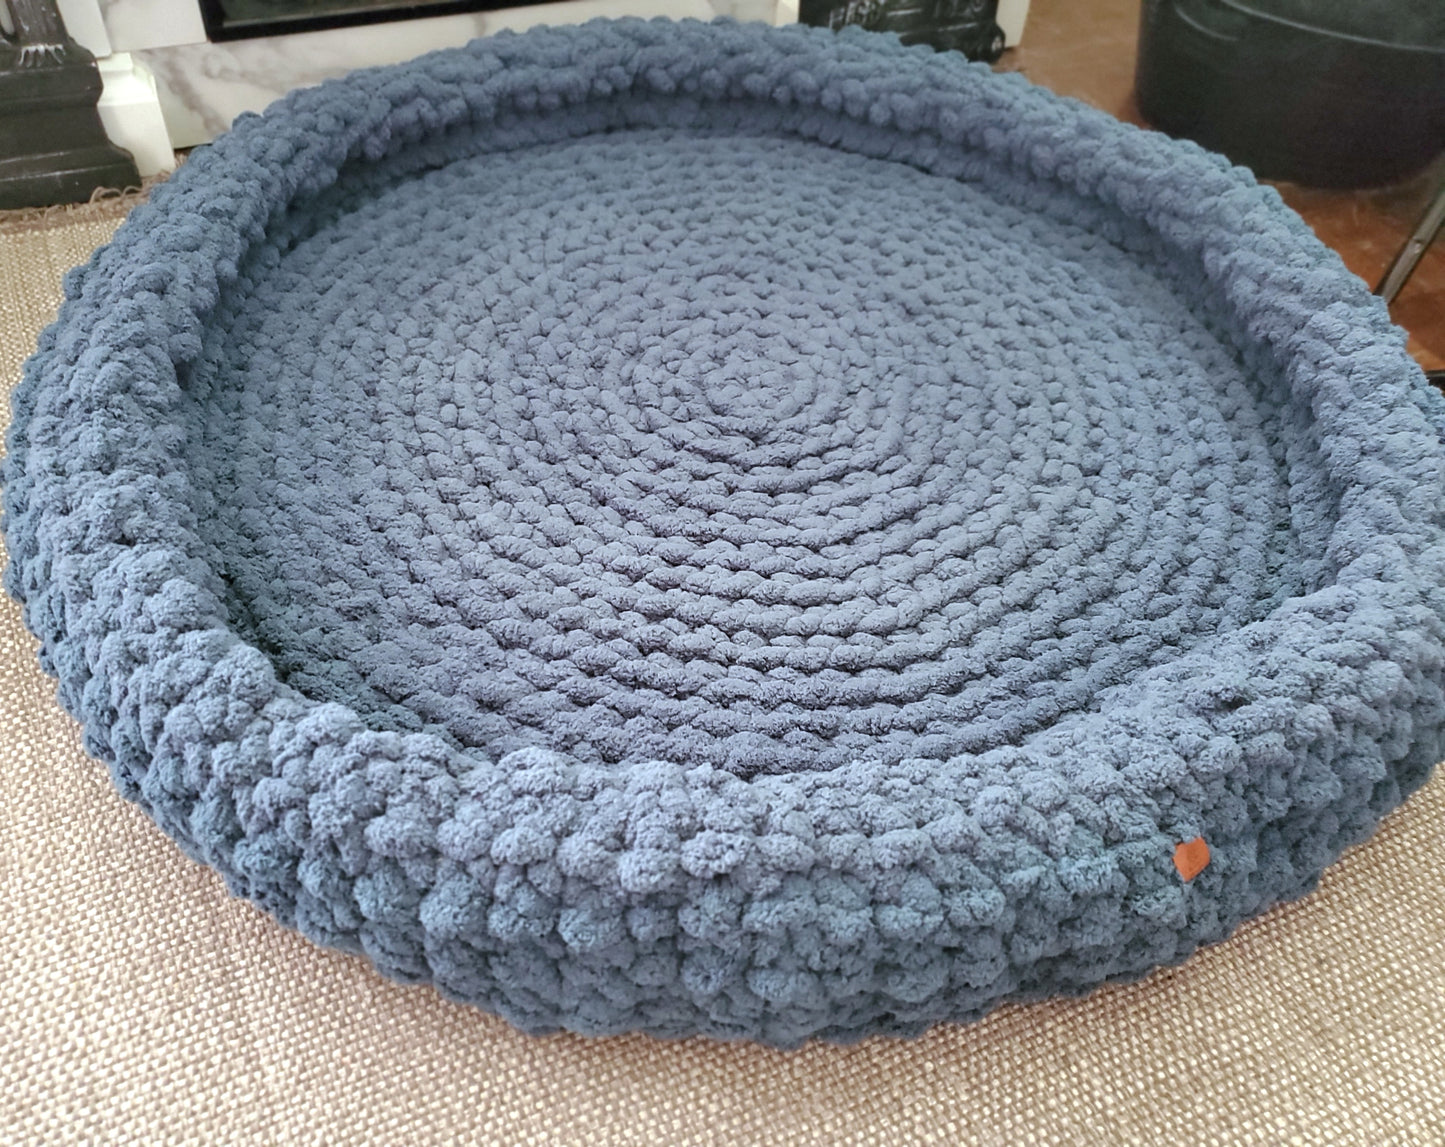 36" Dog Bed | Large Size Chenille Wool Pet Bed